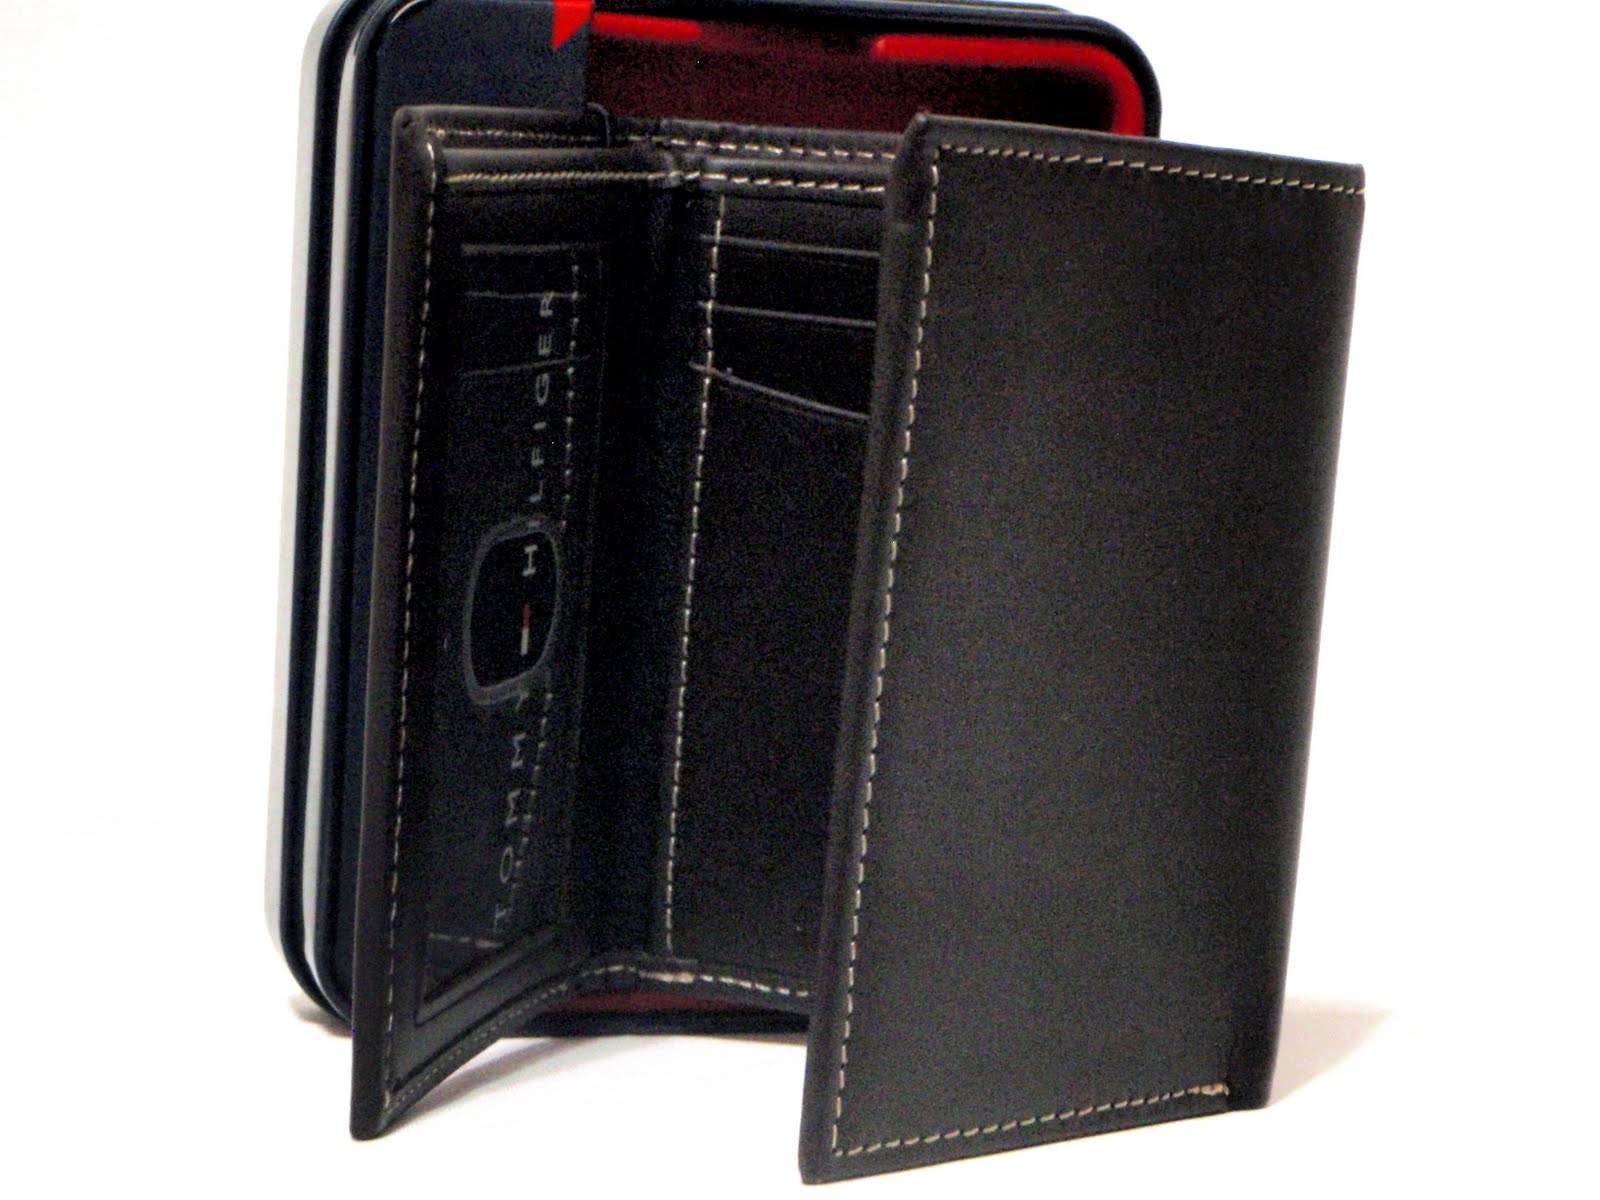 Boutique Malaysia: TOMMY HILFIGER mens TRIFOLD Wallet